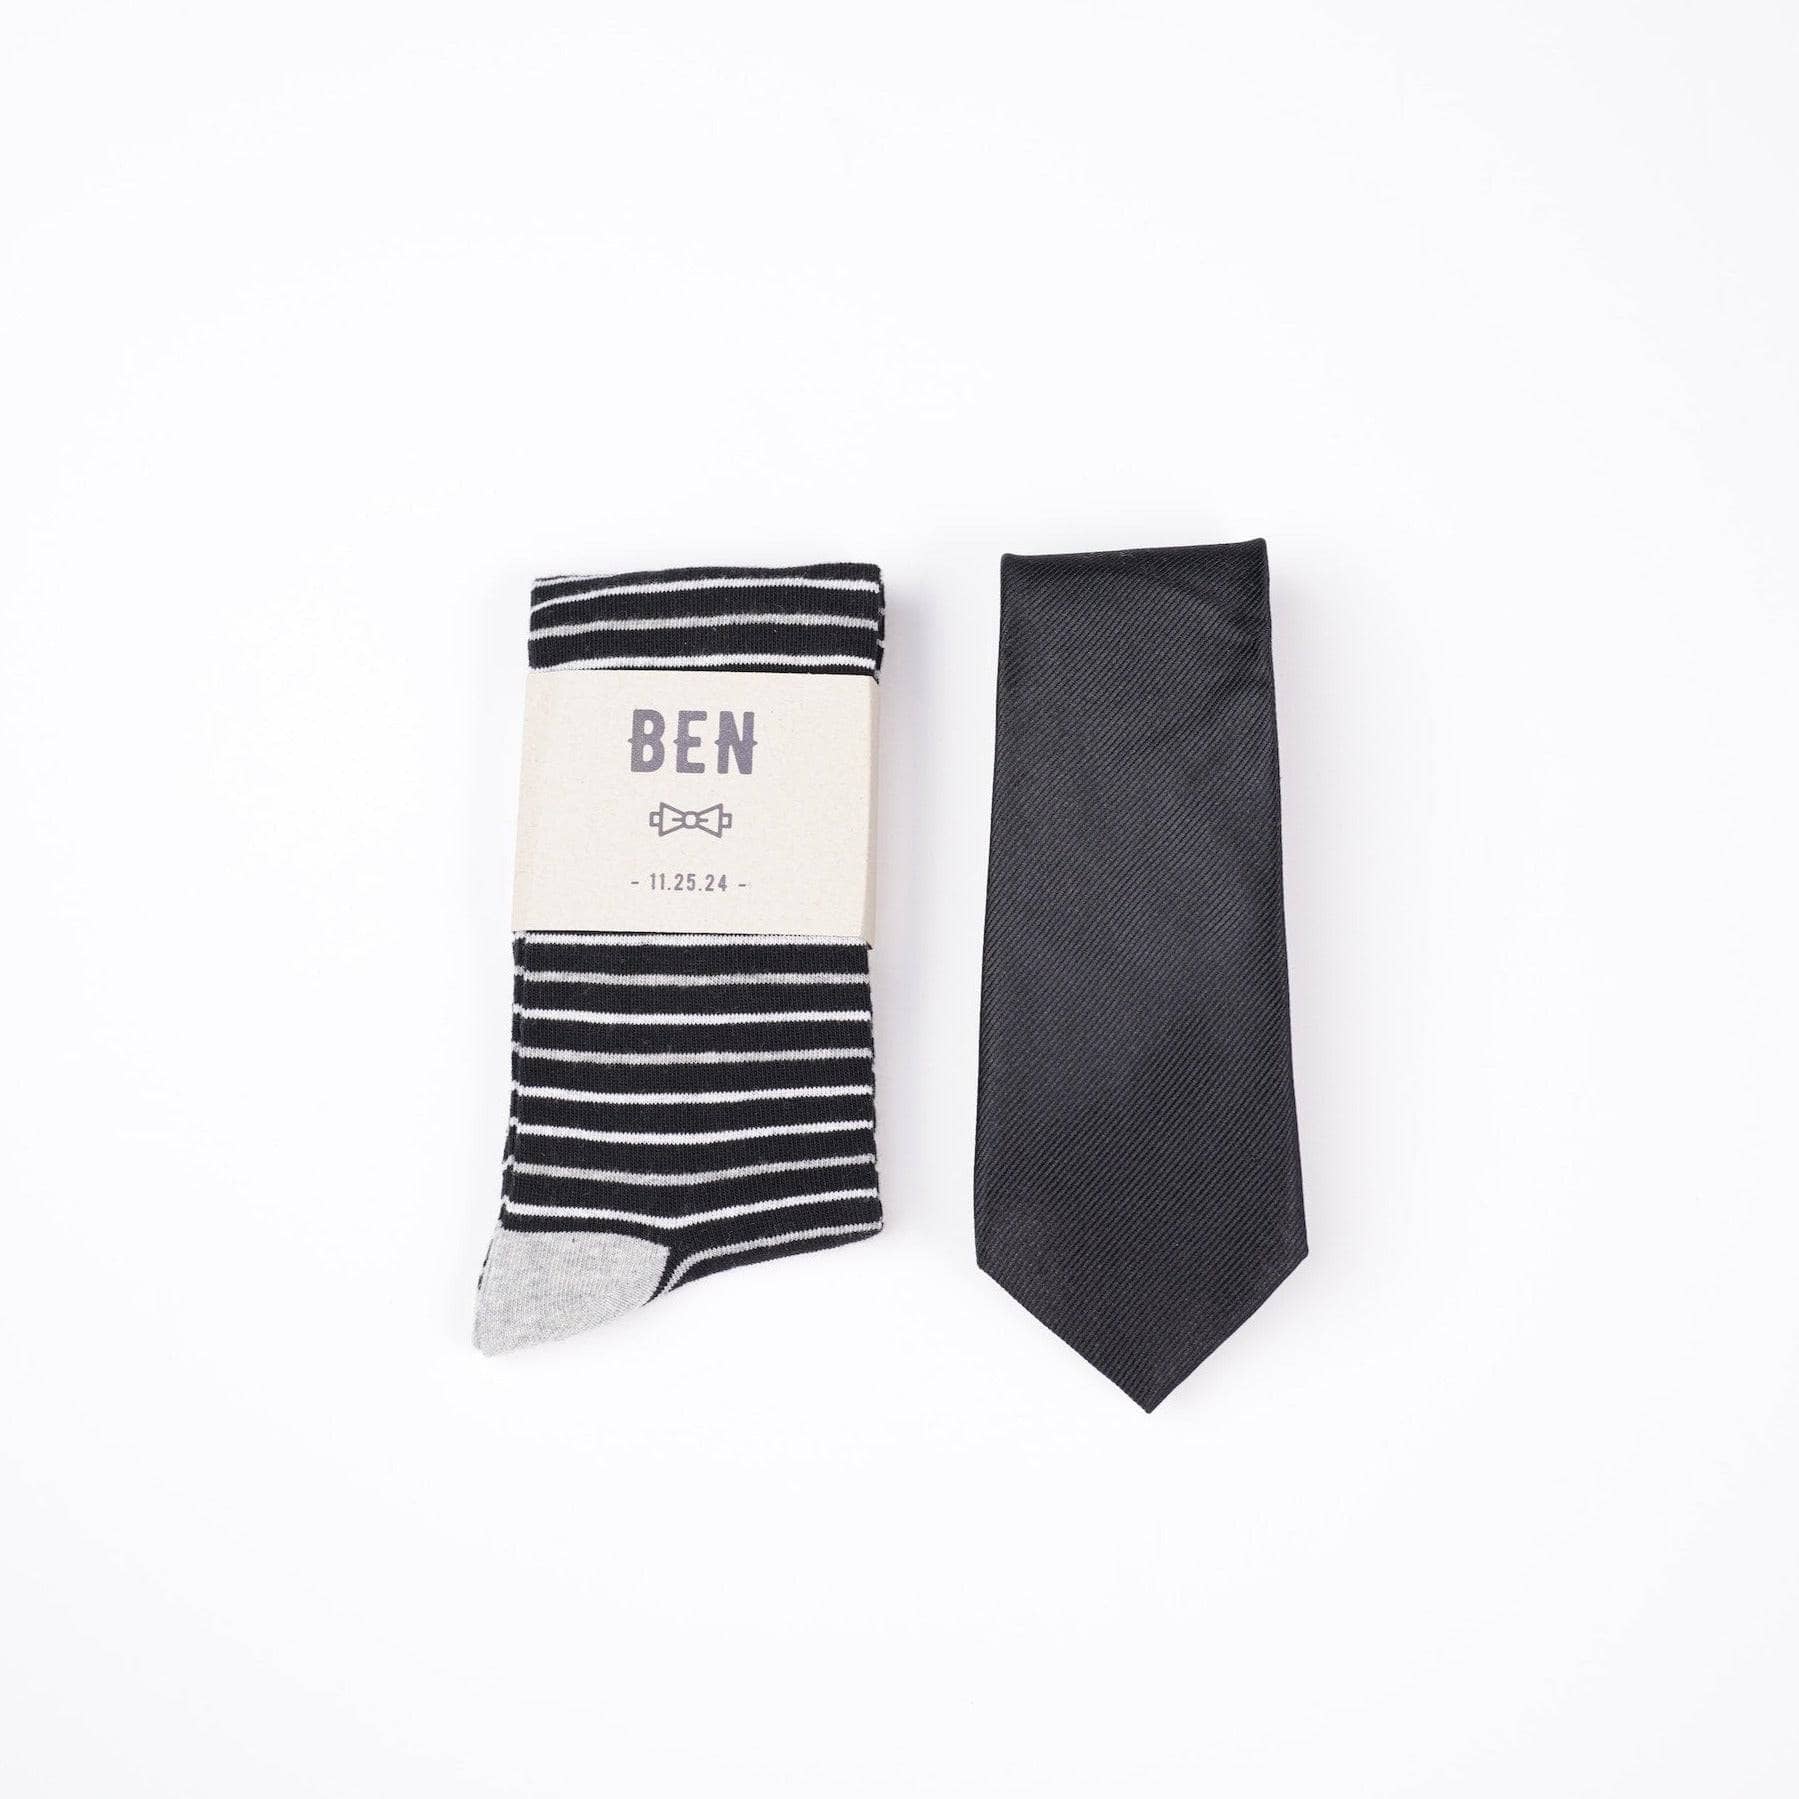 The No Cold Feet - Black - Men's Gifts - Manly Bands